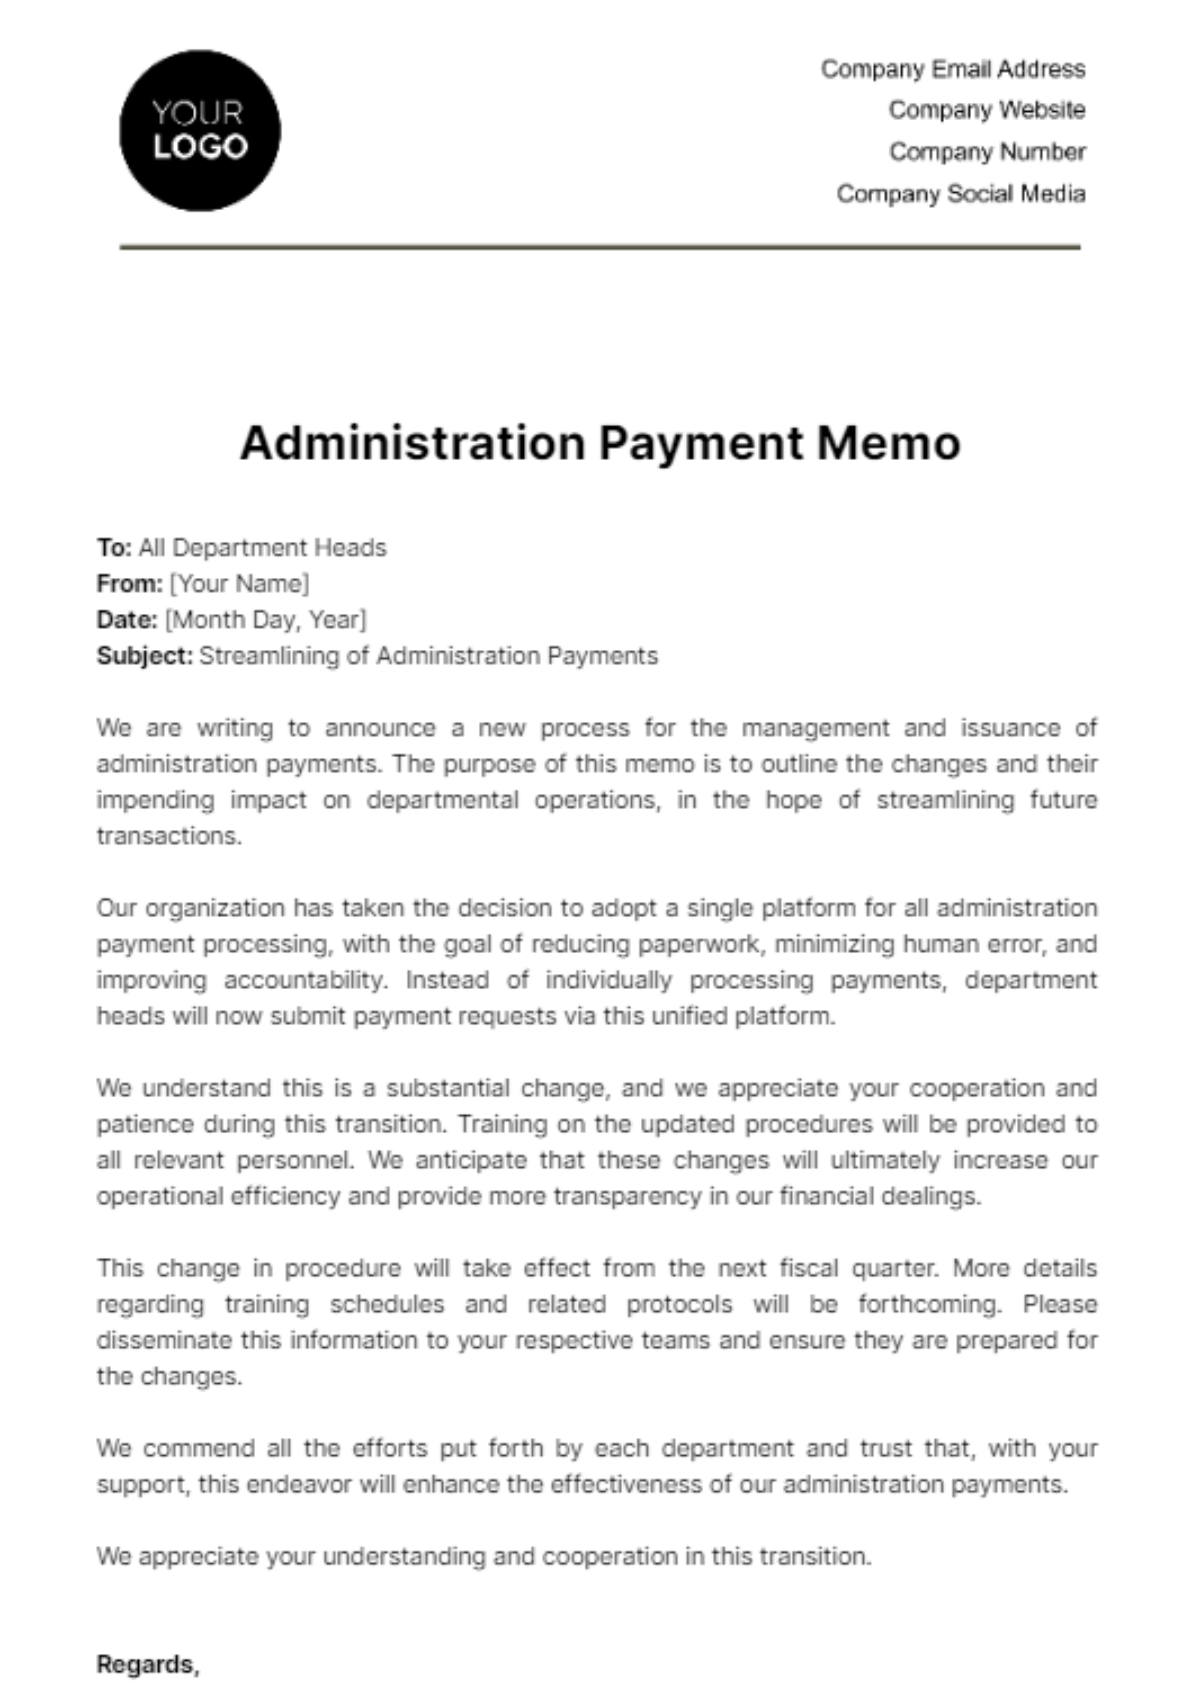 Free Administration Payment Memo Template